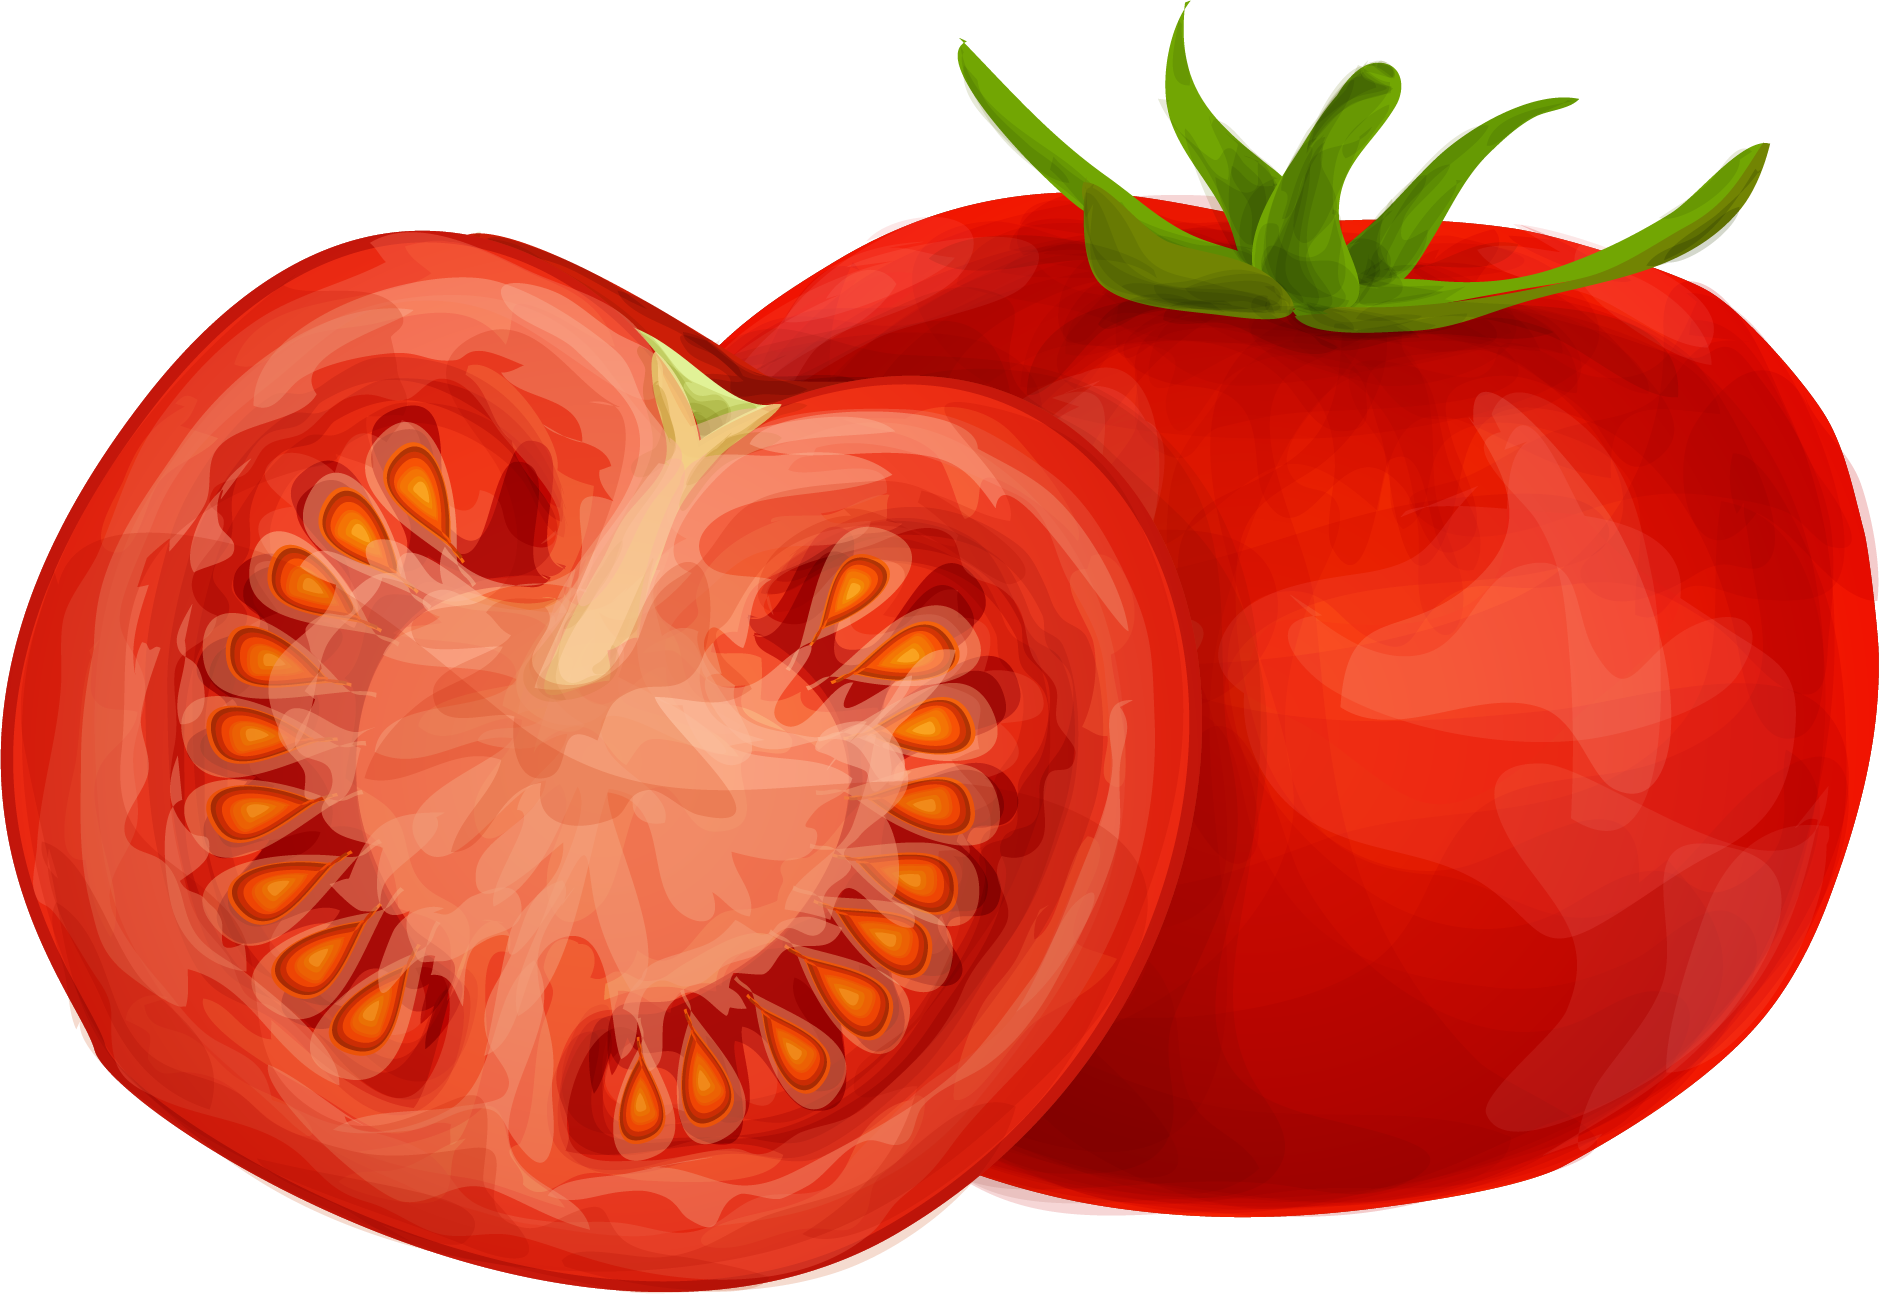 Tomato Clipart PNG Image 01 210x145 - Tomato PNG Images - Transparent Photos